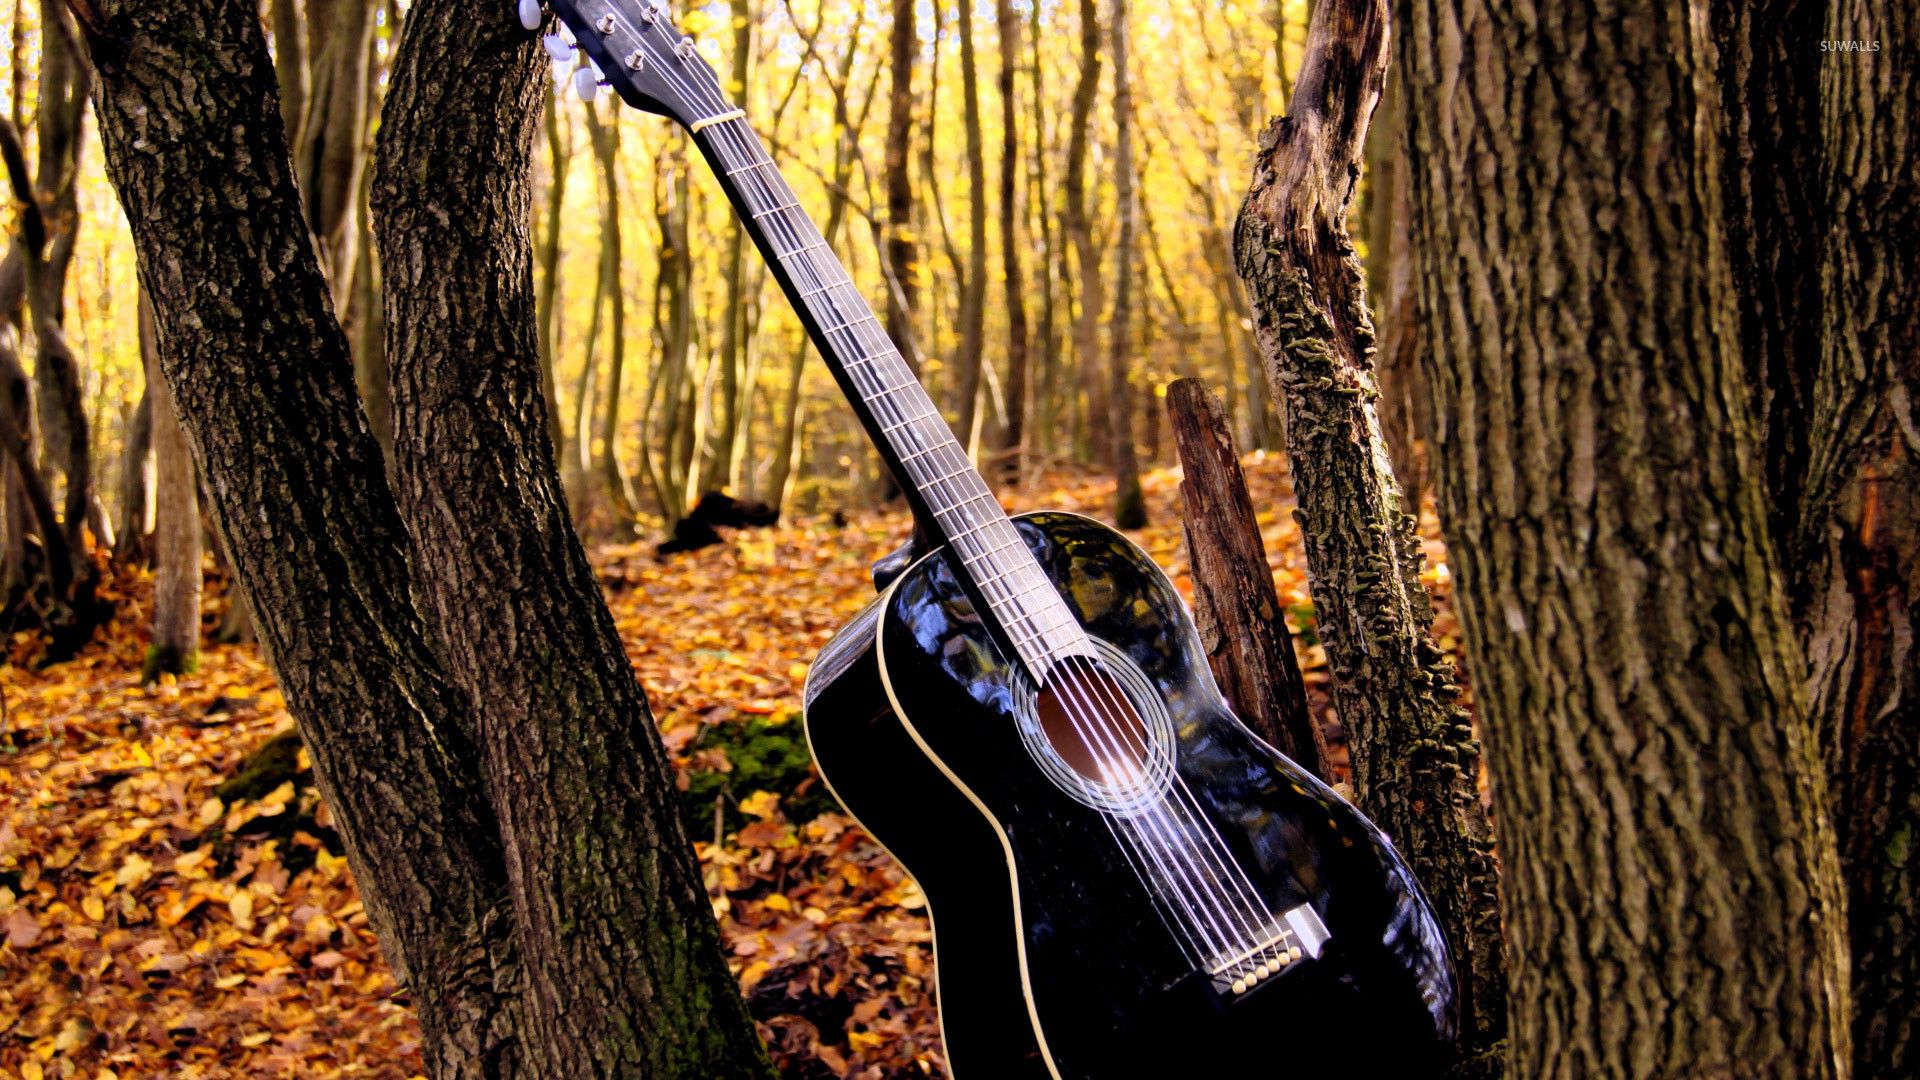 Cool Country Guitar Wallpaper In The Forest Picture. Forest wallpaper, Music wallpaper, Desktop wallpaper background